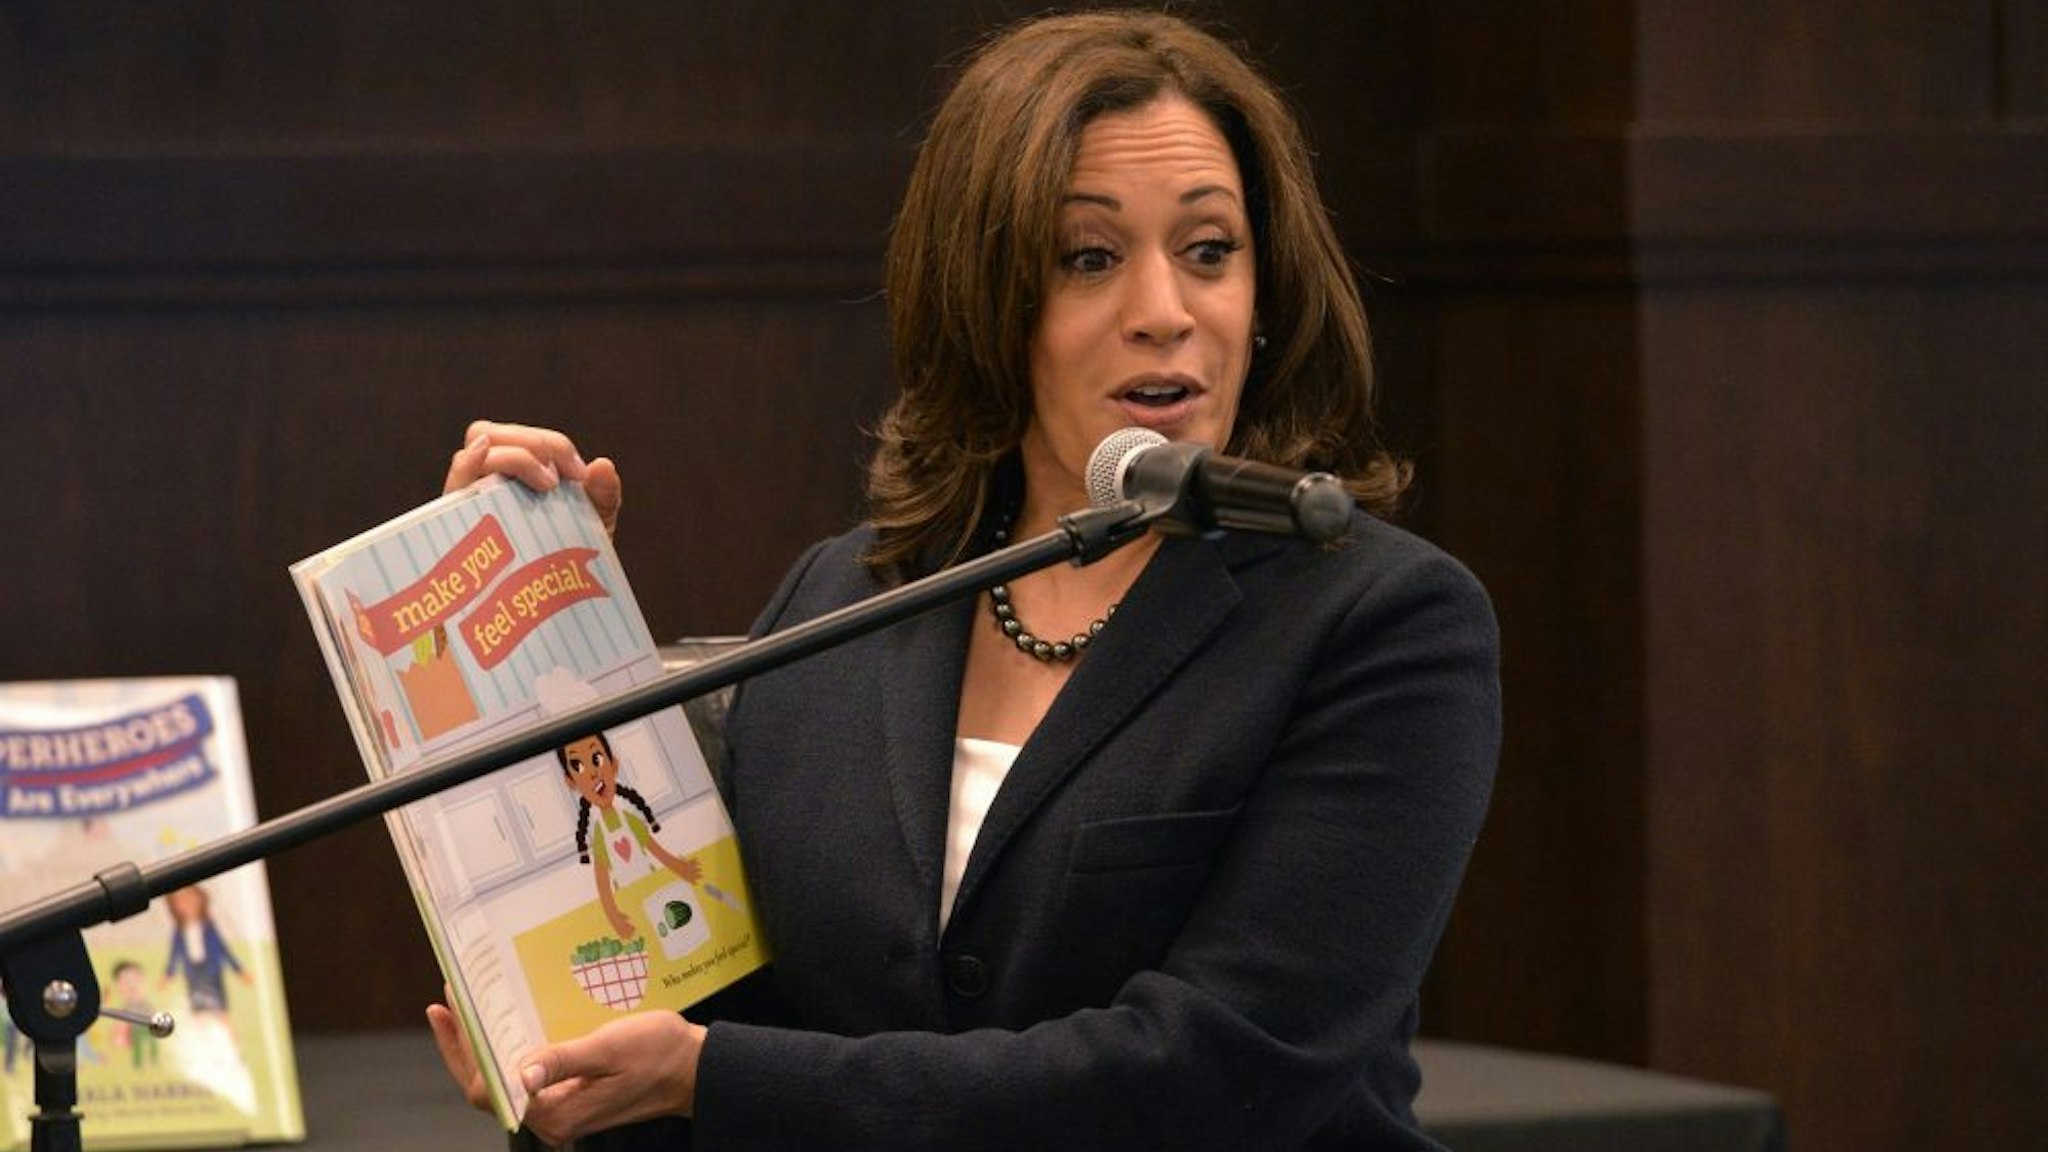 LOS ANGELES, CALIFORNIA - JANUARY 13: California Senator Kamala Harris reads to her audience at a signing event for her childrens book "Superheros Are Everywhere" at Barnes &amp; Noble at The Grove on January 13, 2019 in Los Angeles, California.